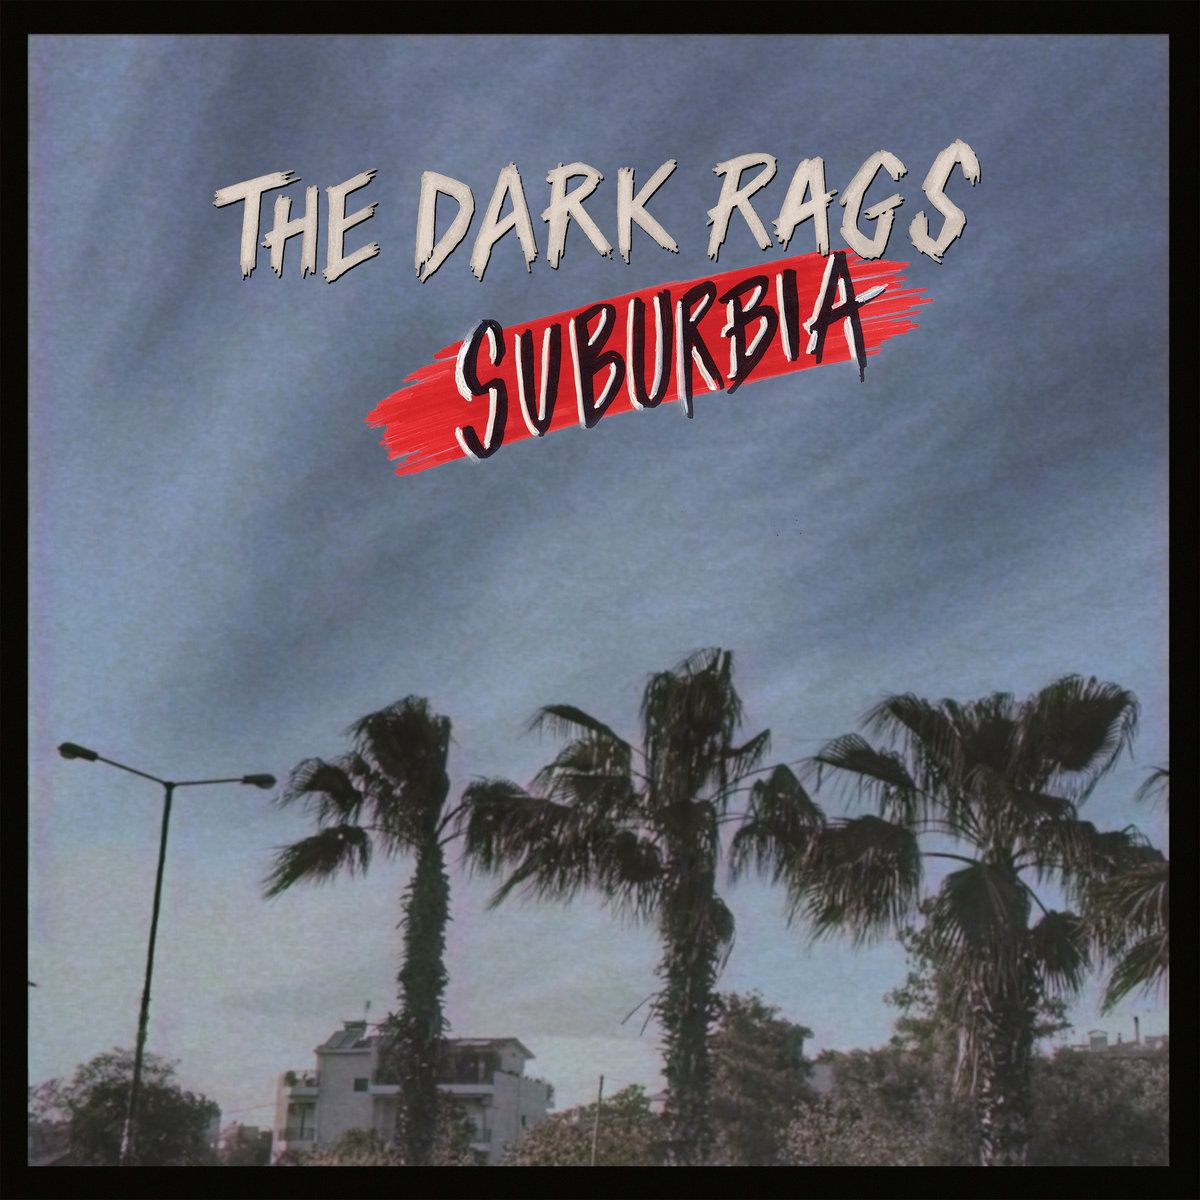 The Dark Rags cover